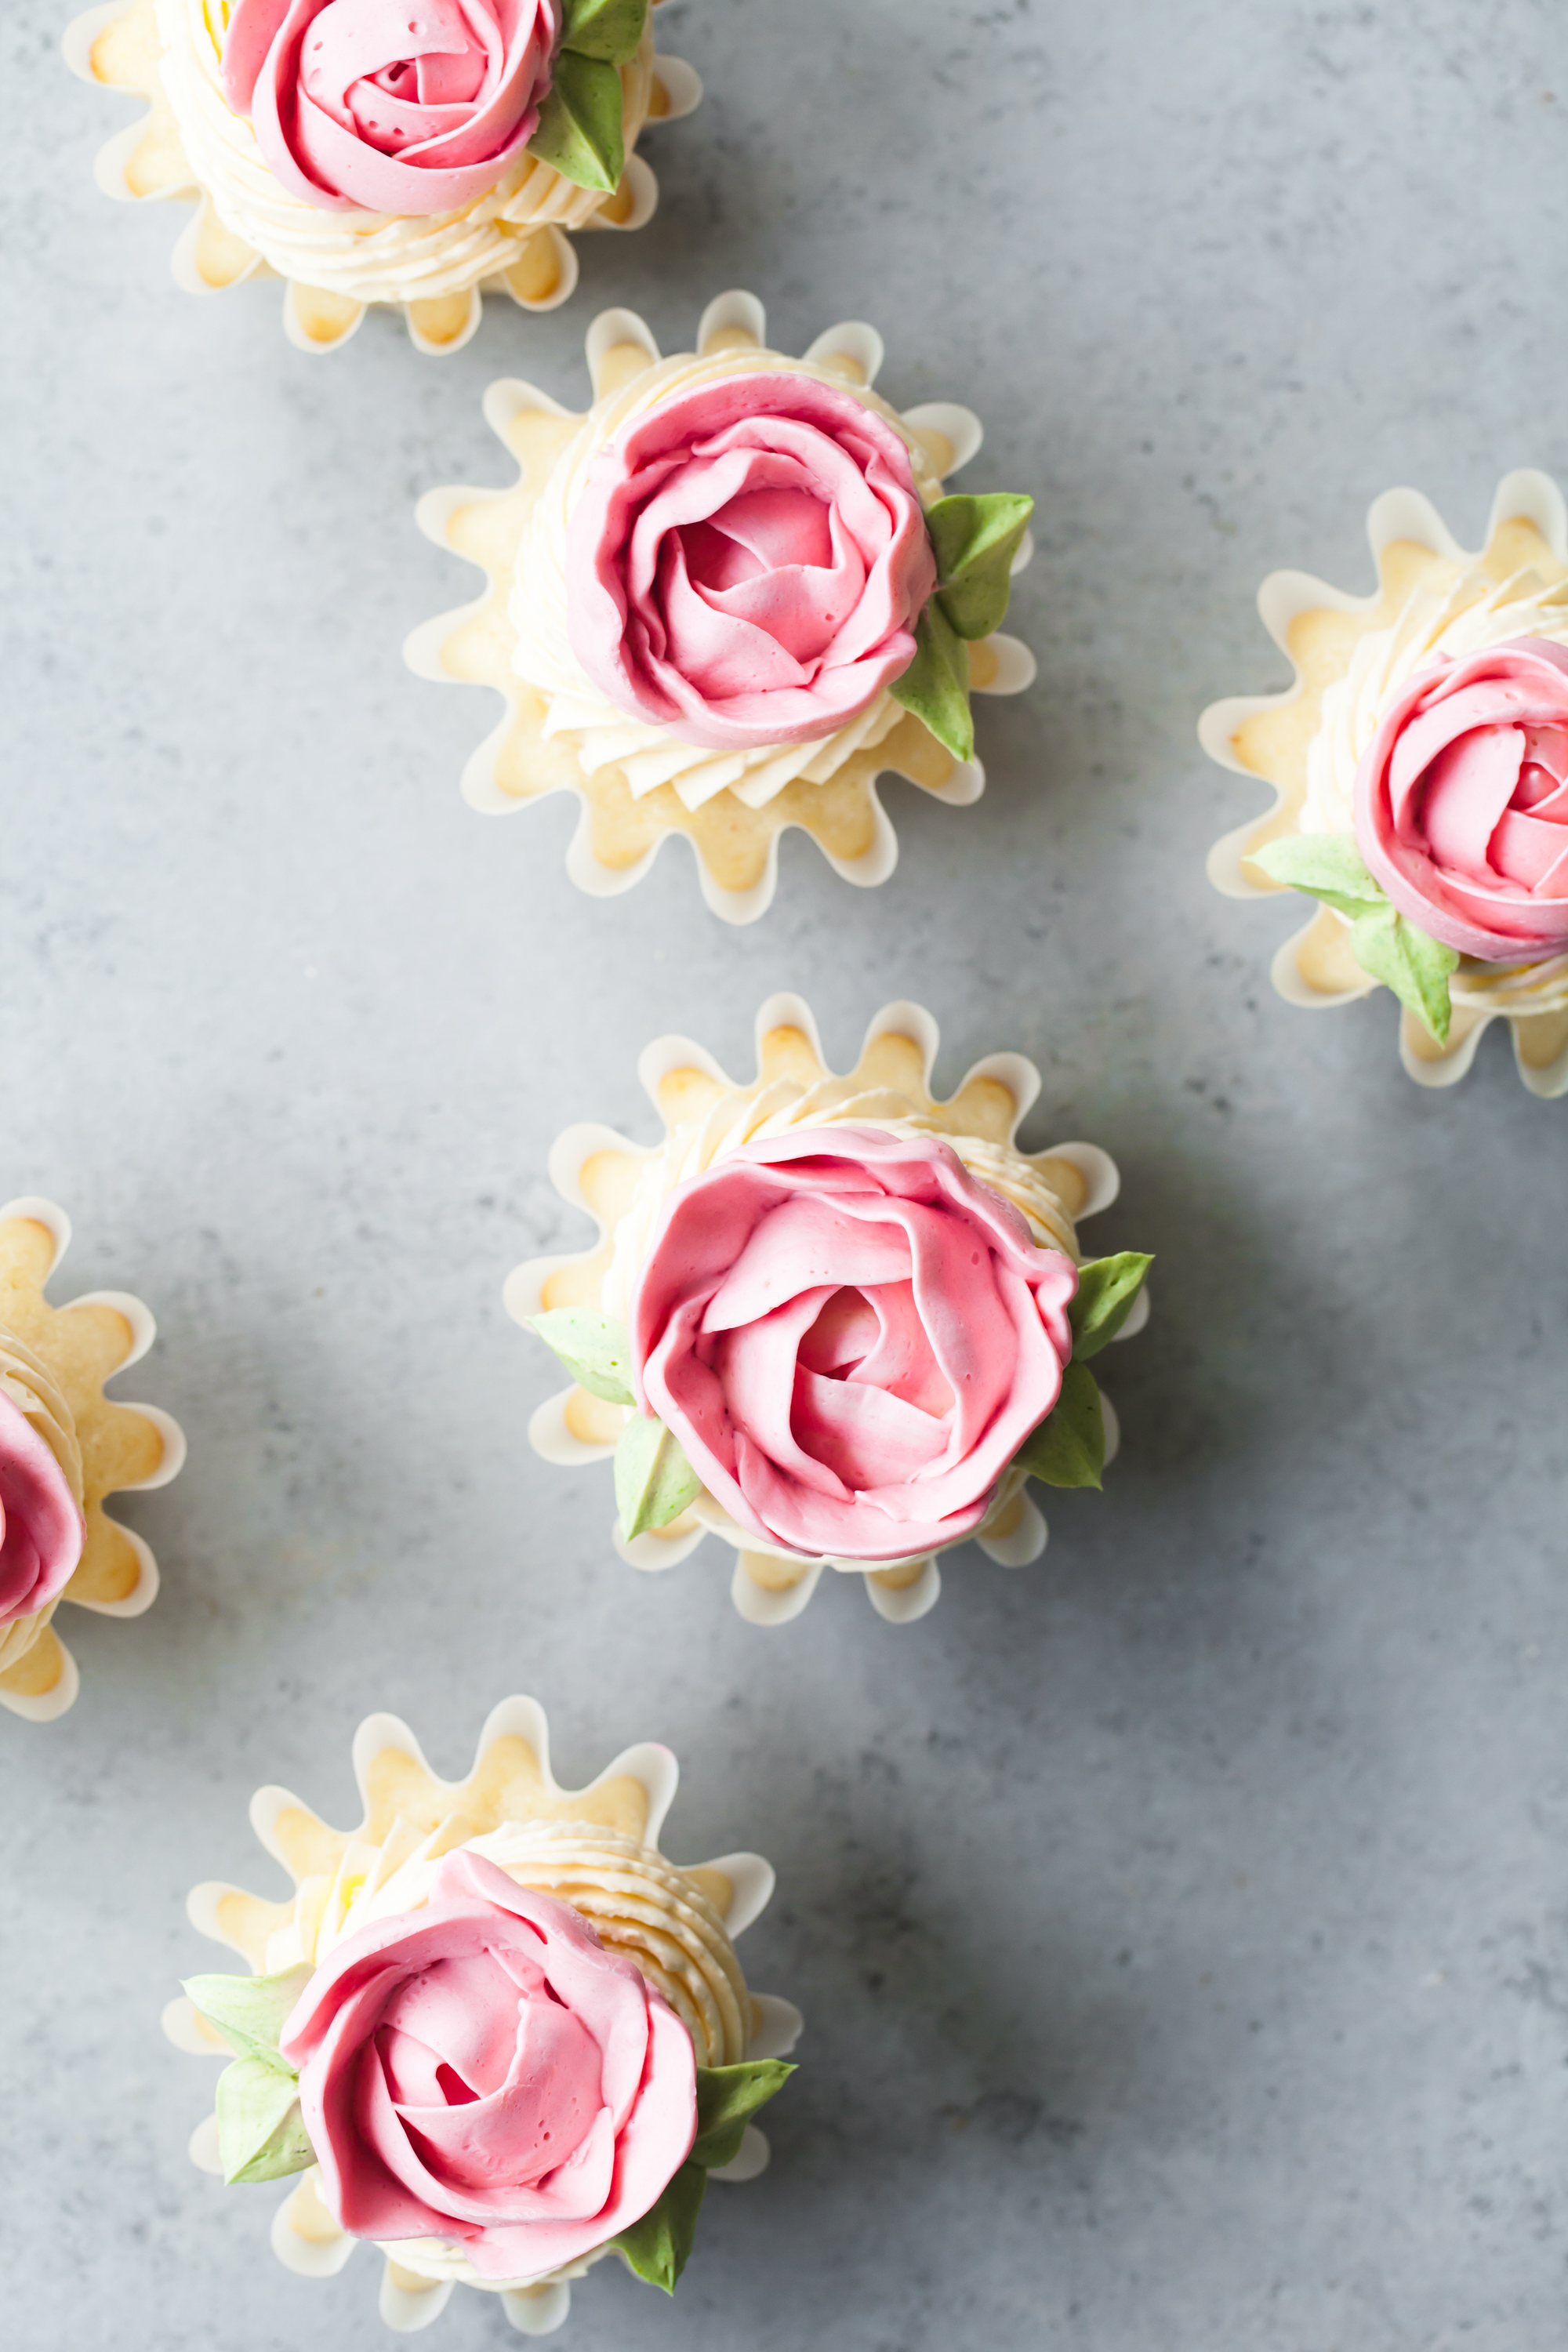 Lemon Passion Fruit Cupcakes with piped peony buttercream flowers